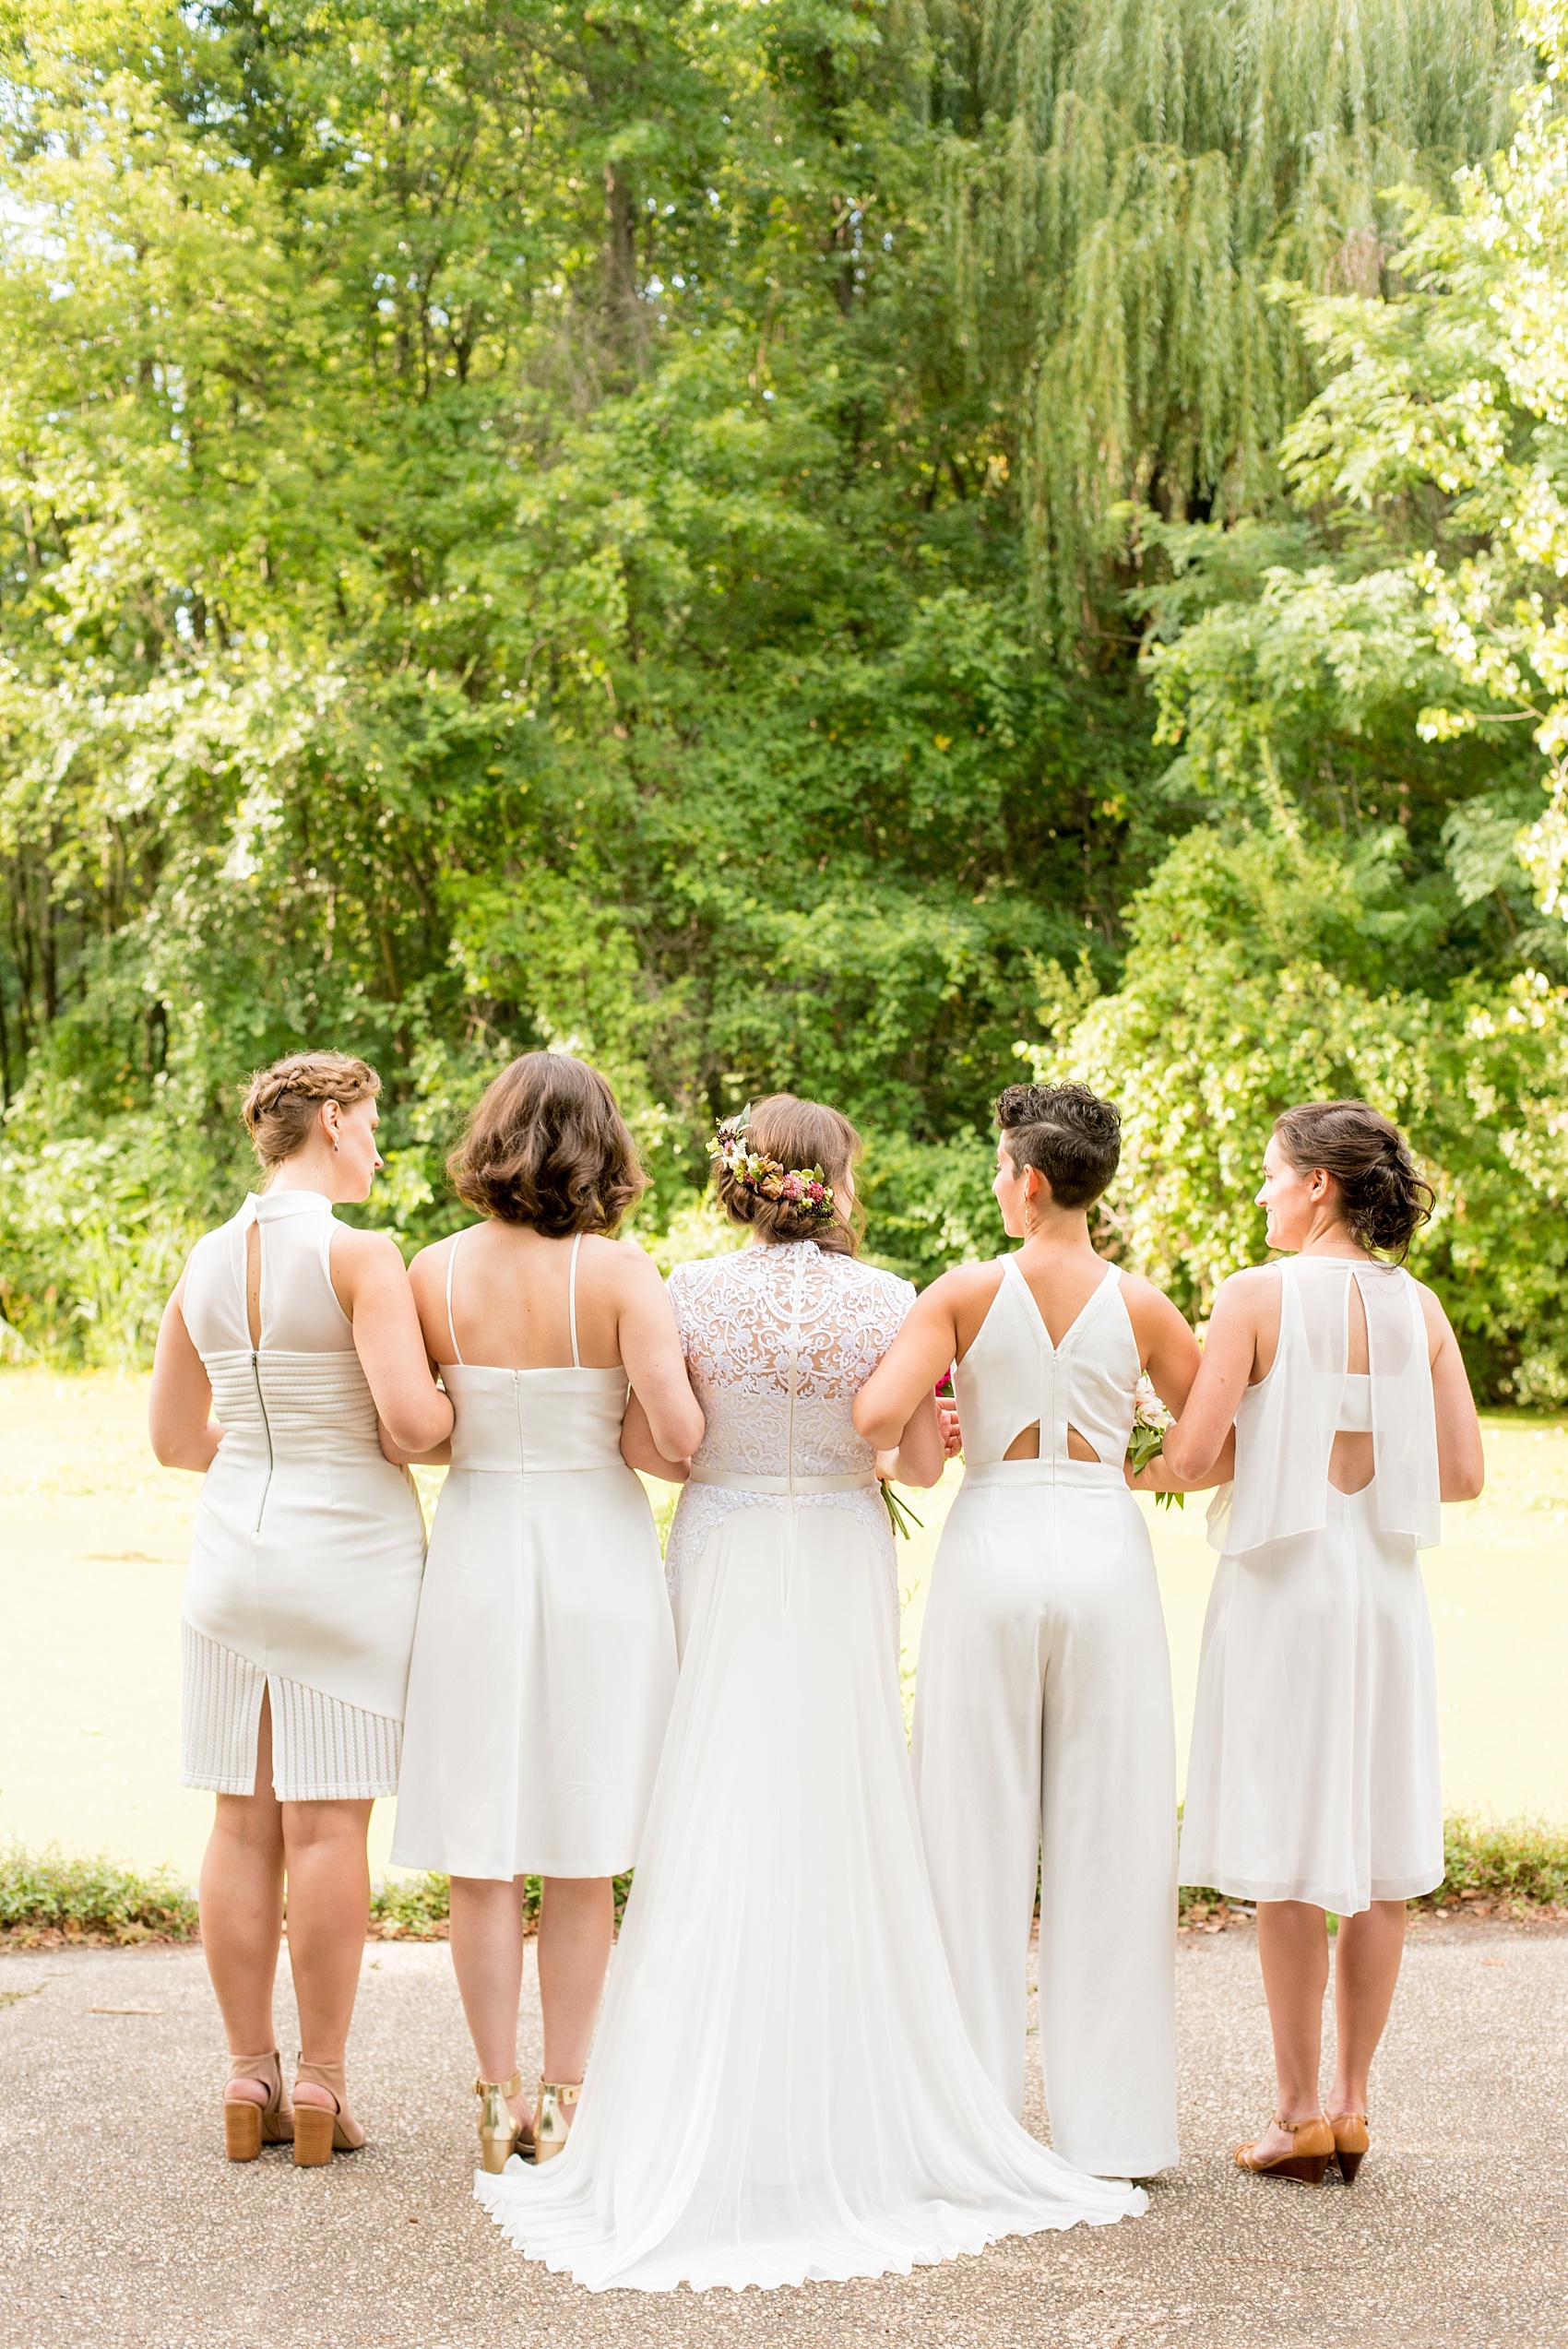 Mikkel Paige Photography photos of a wedding at Prospect Park Boathouse in Brooklyn, NY. The bride and her bridesmaids wore different white dresses with unique backs in this candid bridal party picture.